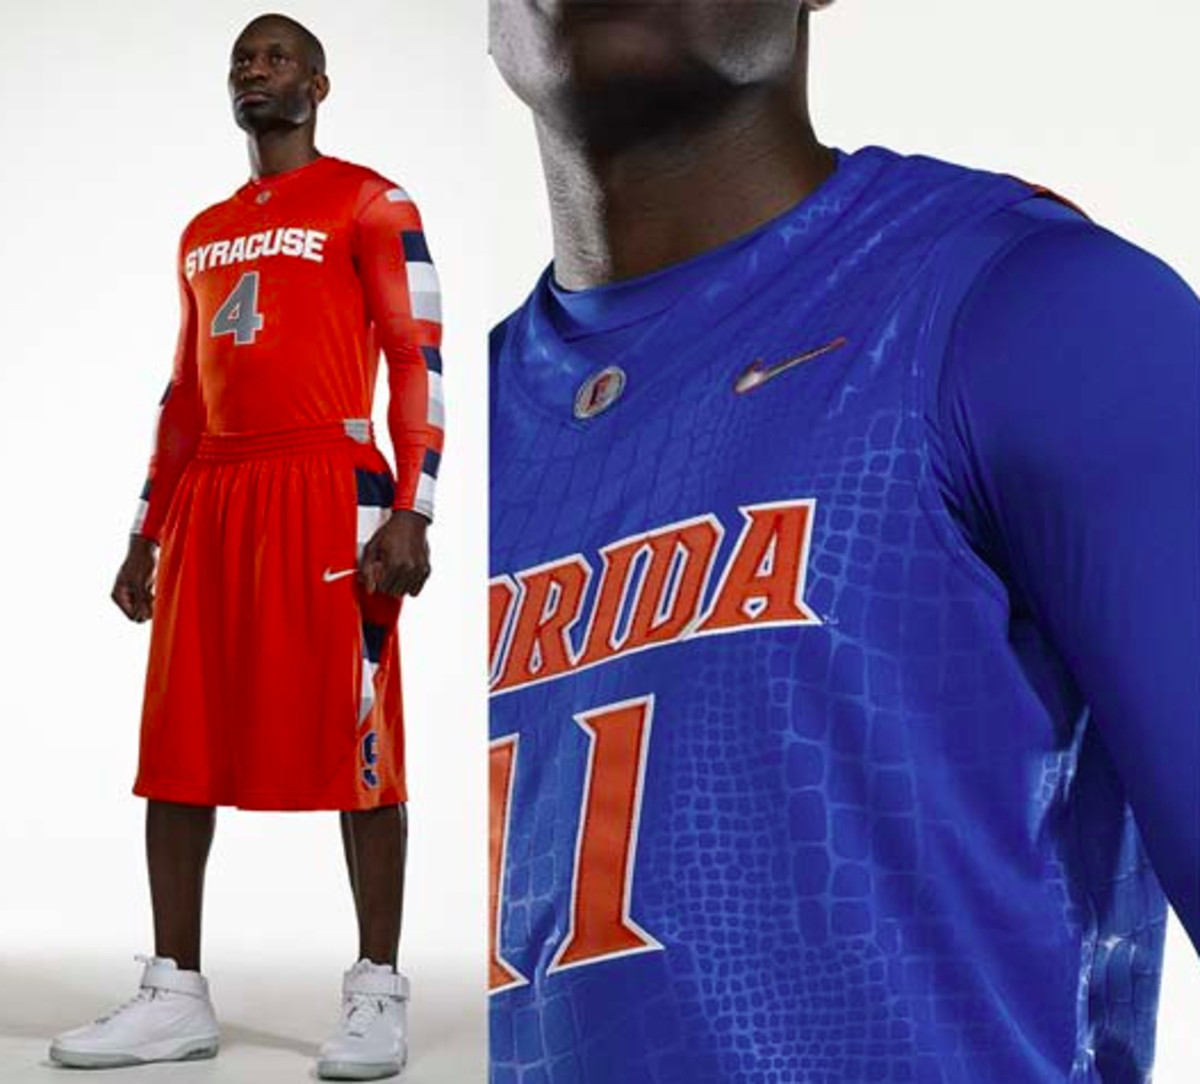 Nike_System_of_Dress_Cuse_and_Florida_38553.jpg